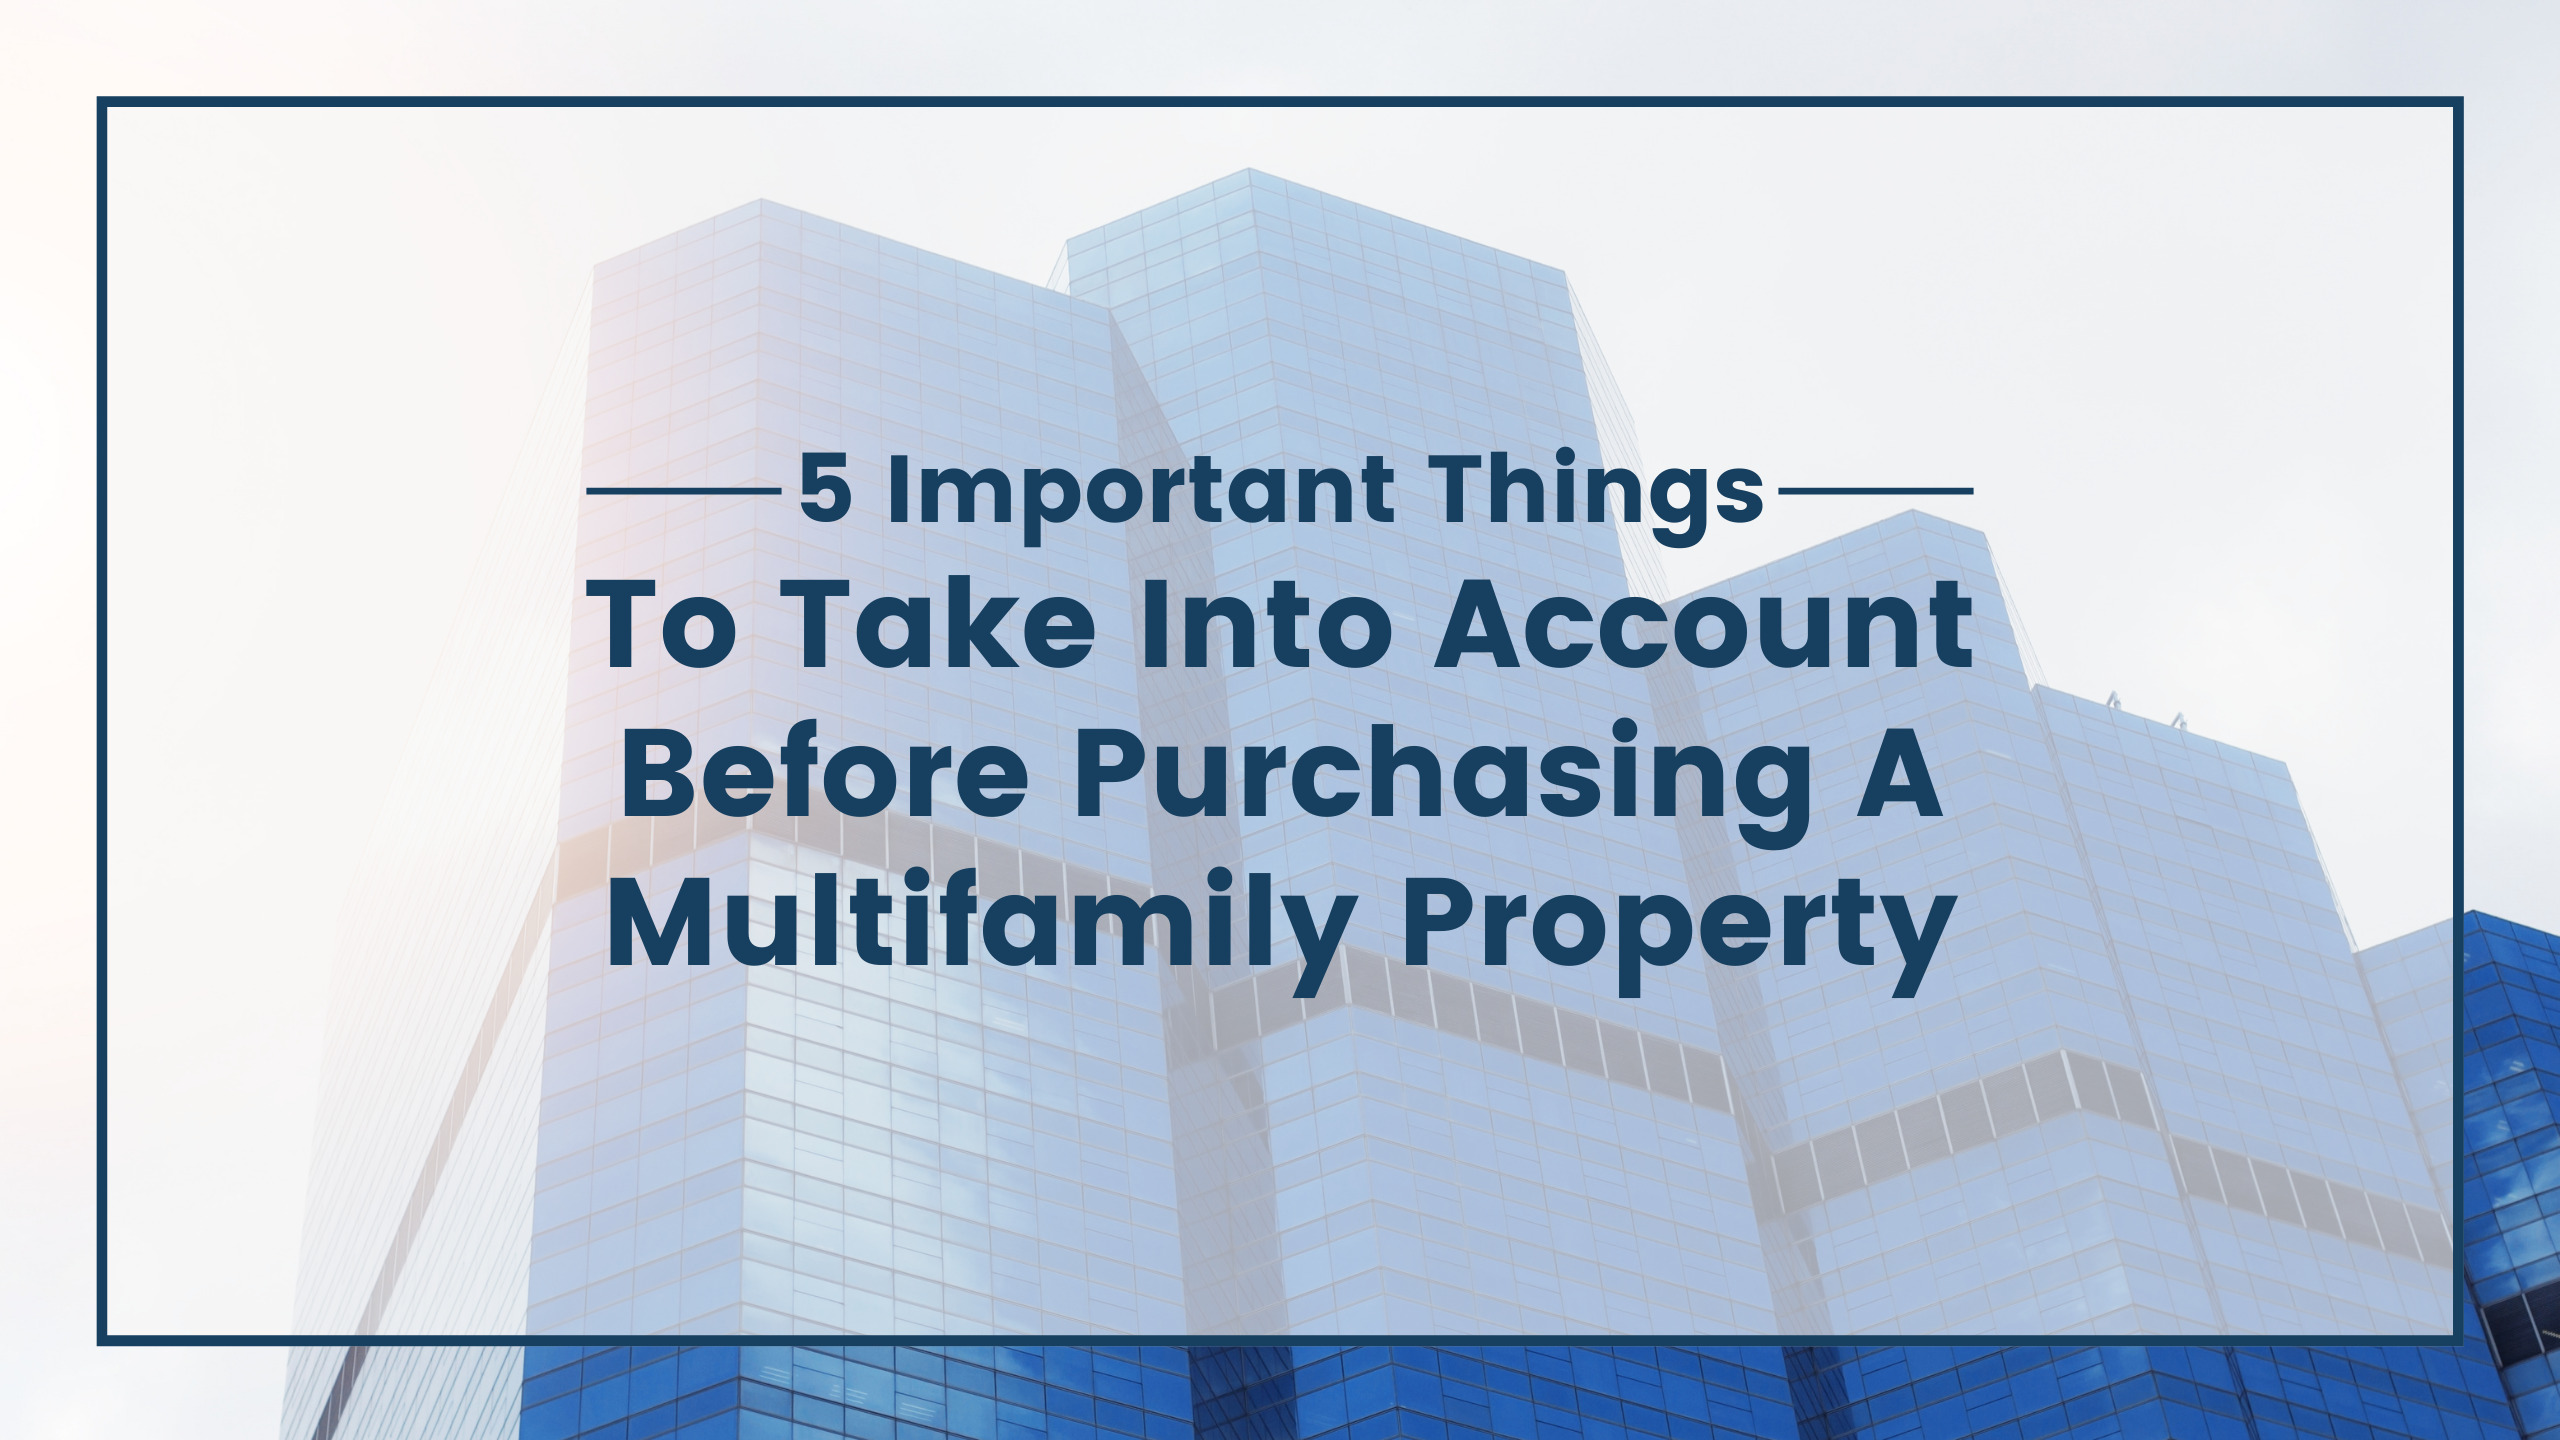 5-important-things-to-take-into-account-before-purchasing-a-multifamily-property.jpg